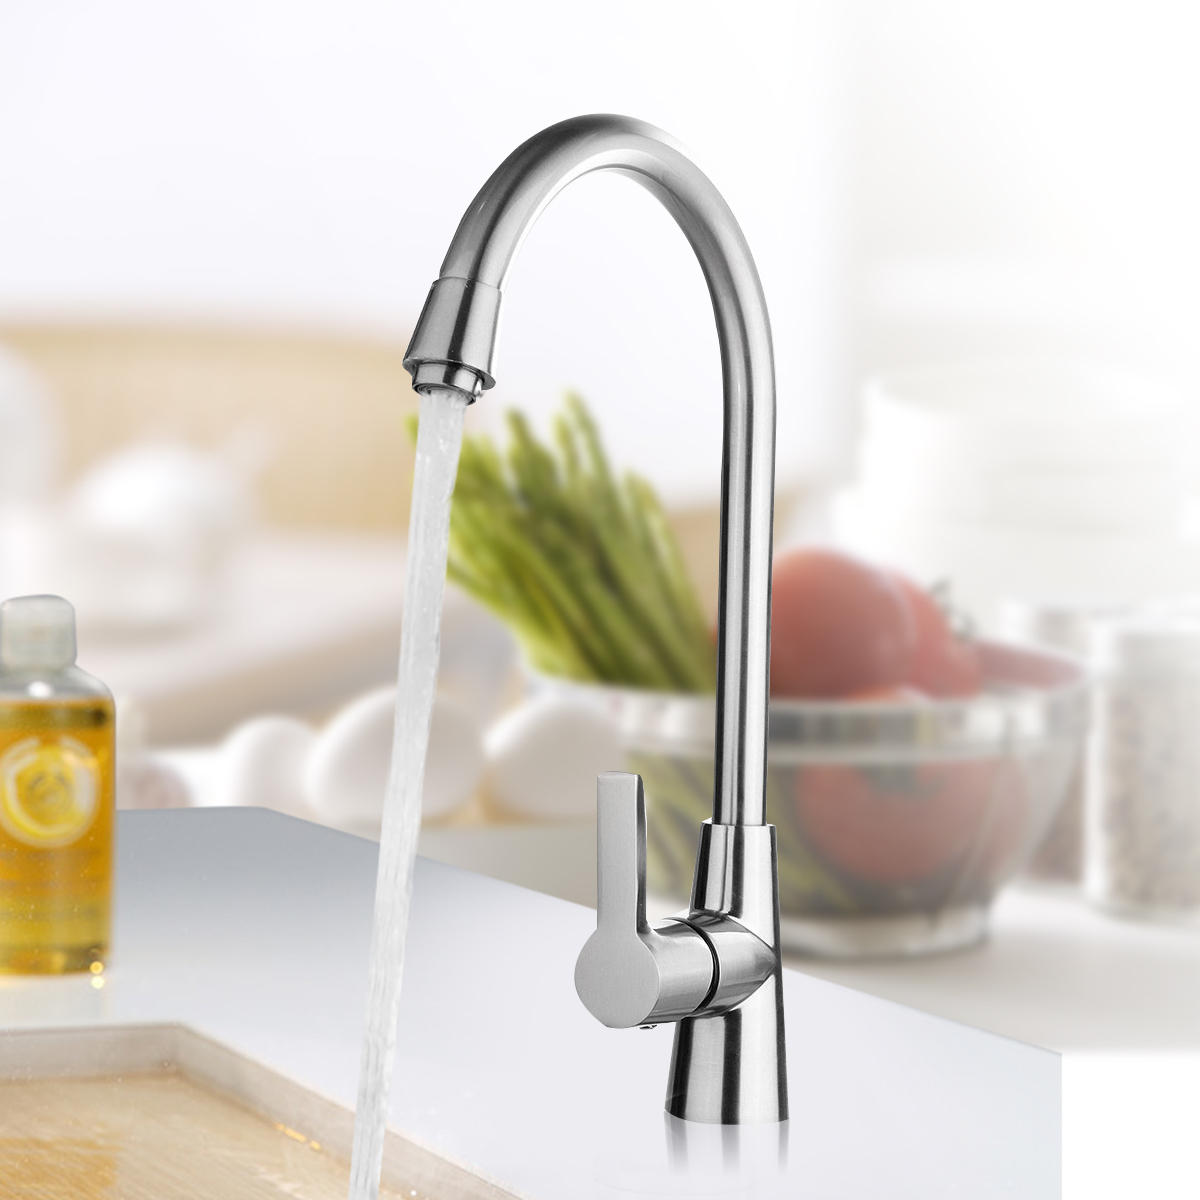 Image result for water tap on kitchen,nari